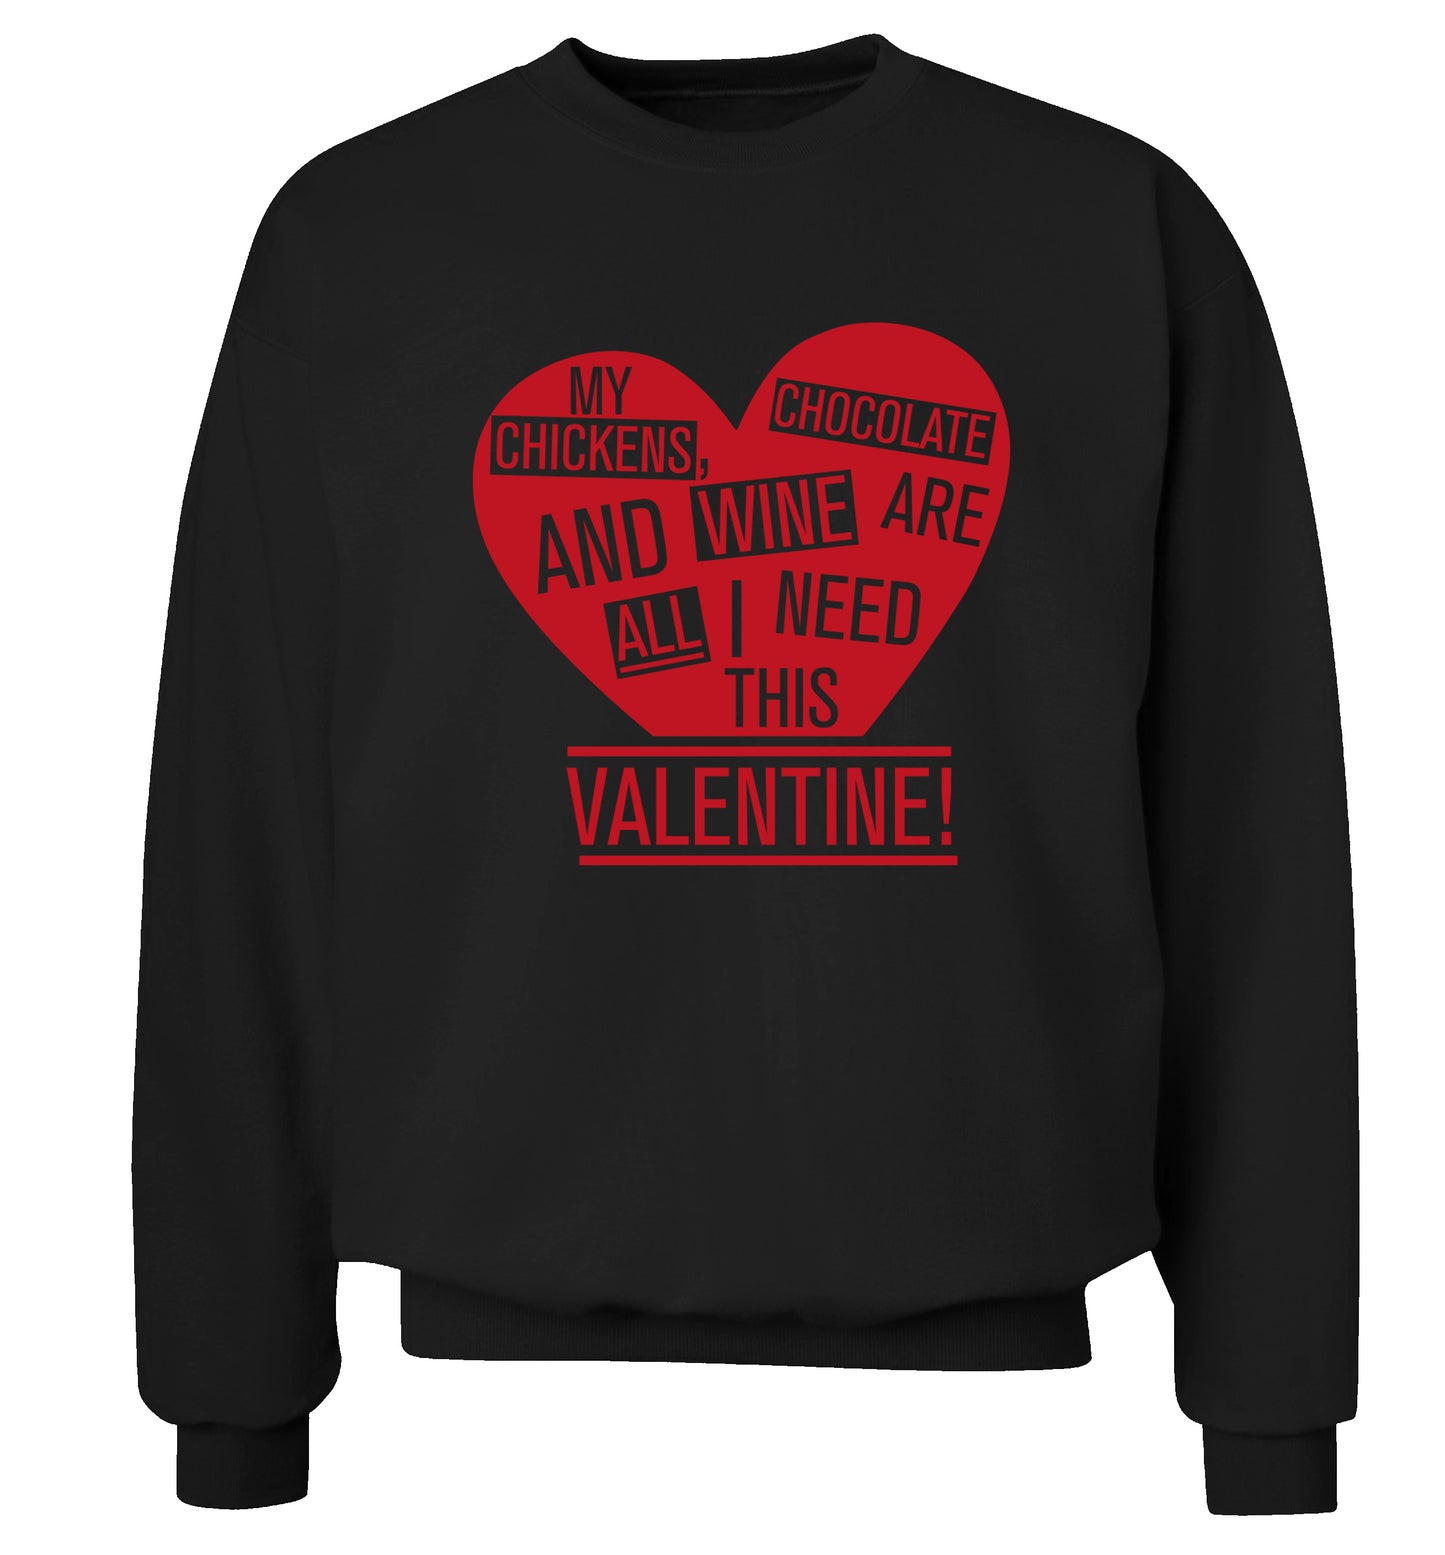 My chickens, chocolate and wine are all I need this valentine! Adult's unisex black Sweater 2XL